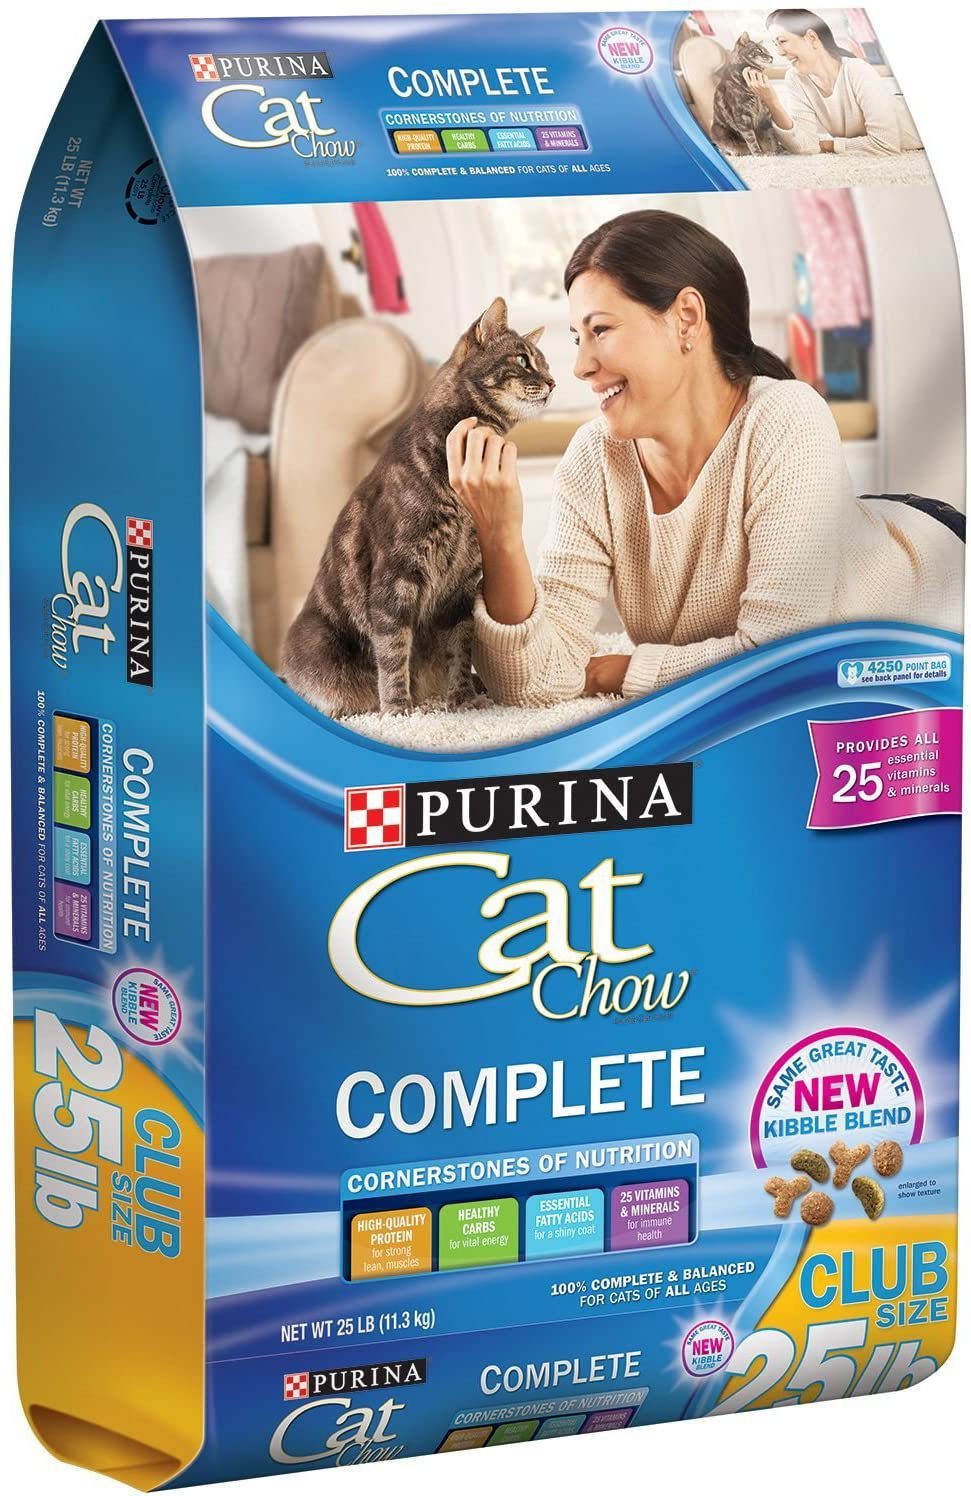 Purina Cat Chow Complete (25 lbs.)